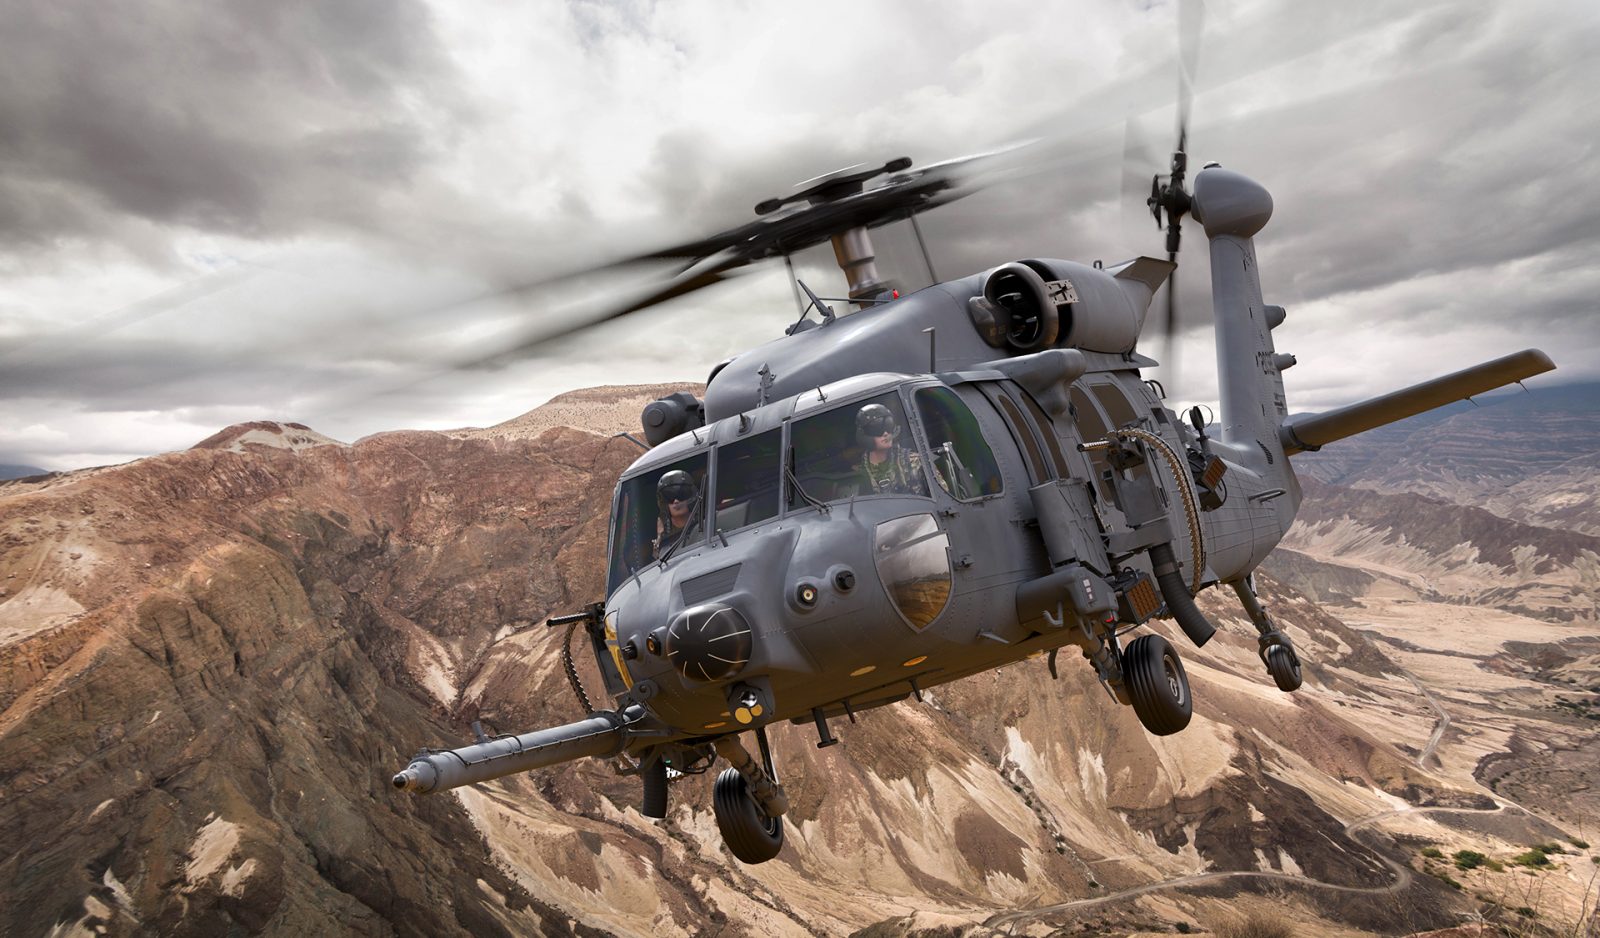 Interesting facts about the Sikorsky HH-60 Pave Hawk; the only Combat Search & Rescue dedicated US helicopter